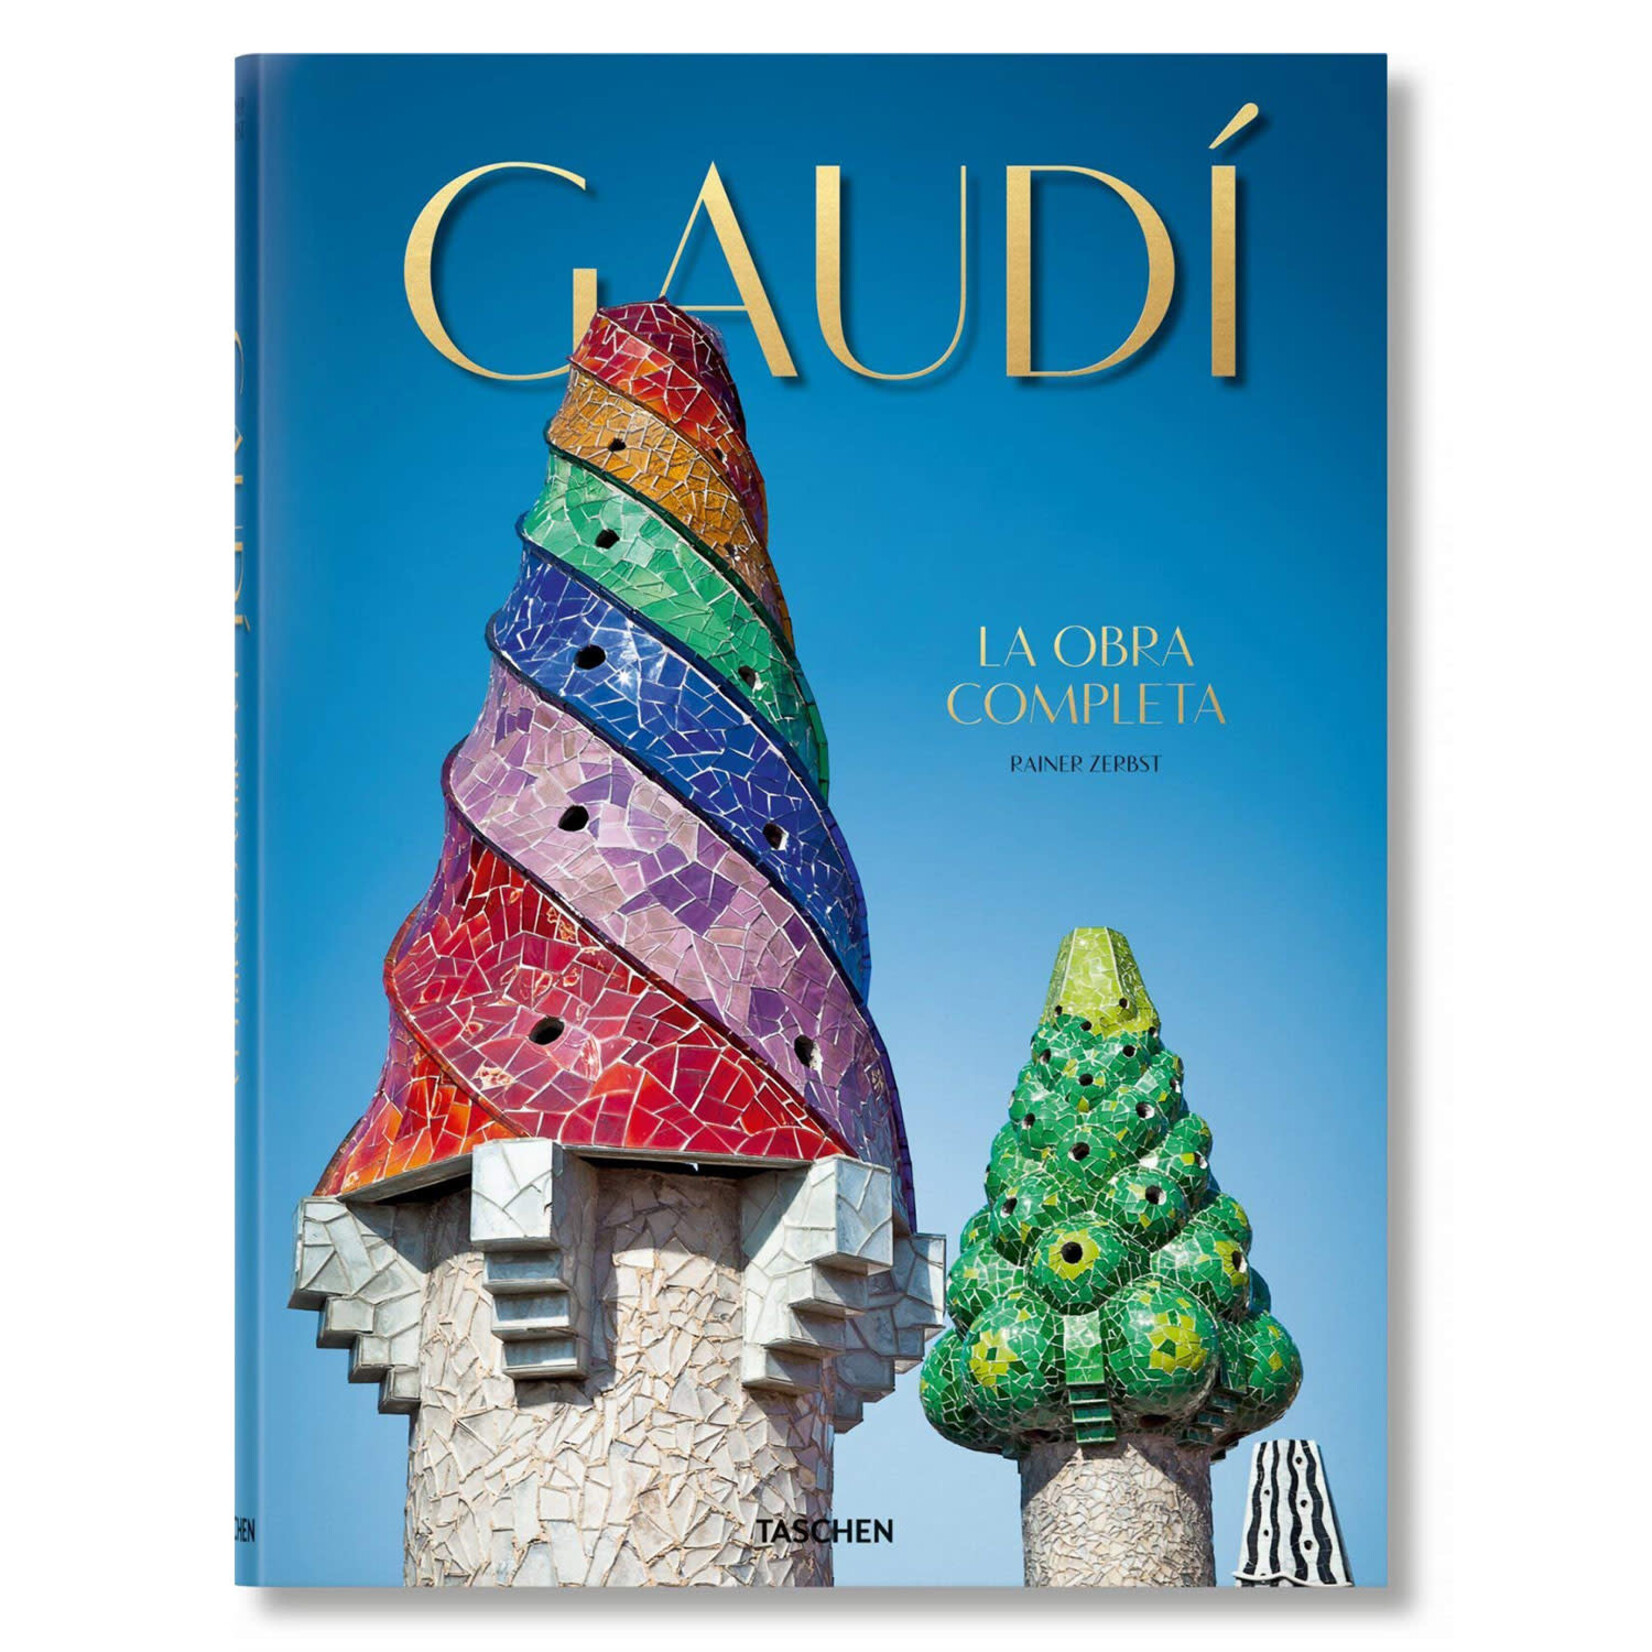 Gaudi: The Complete Works